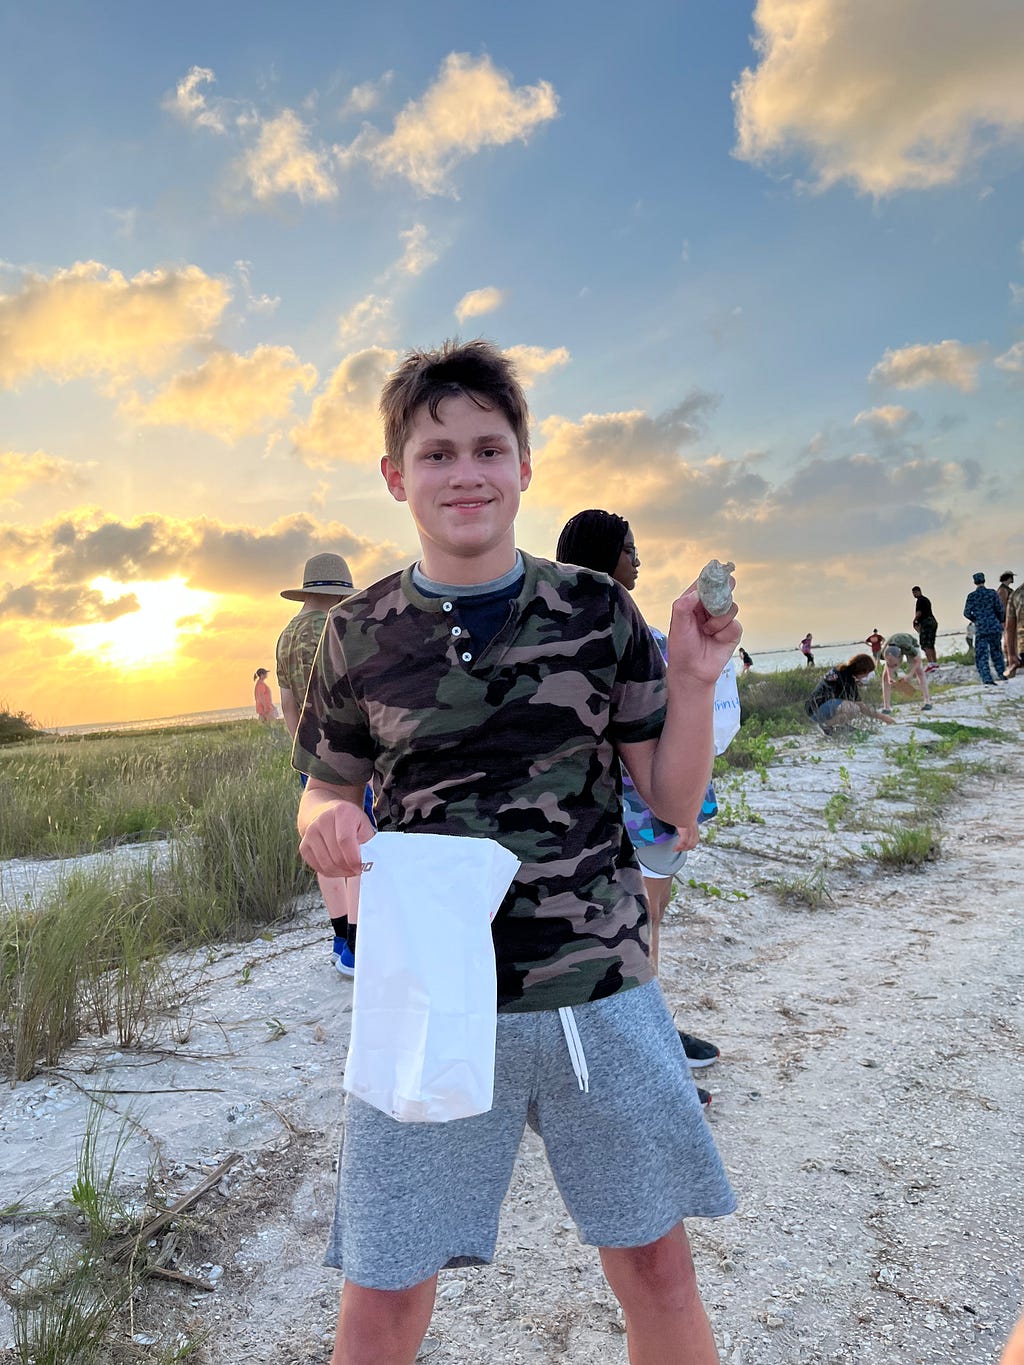 camper holds up shell he found beachcombing on the bay. the rest of the campers are in the background beachcombing. THe sun is setting in the background